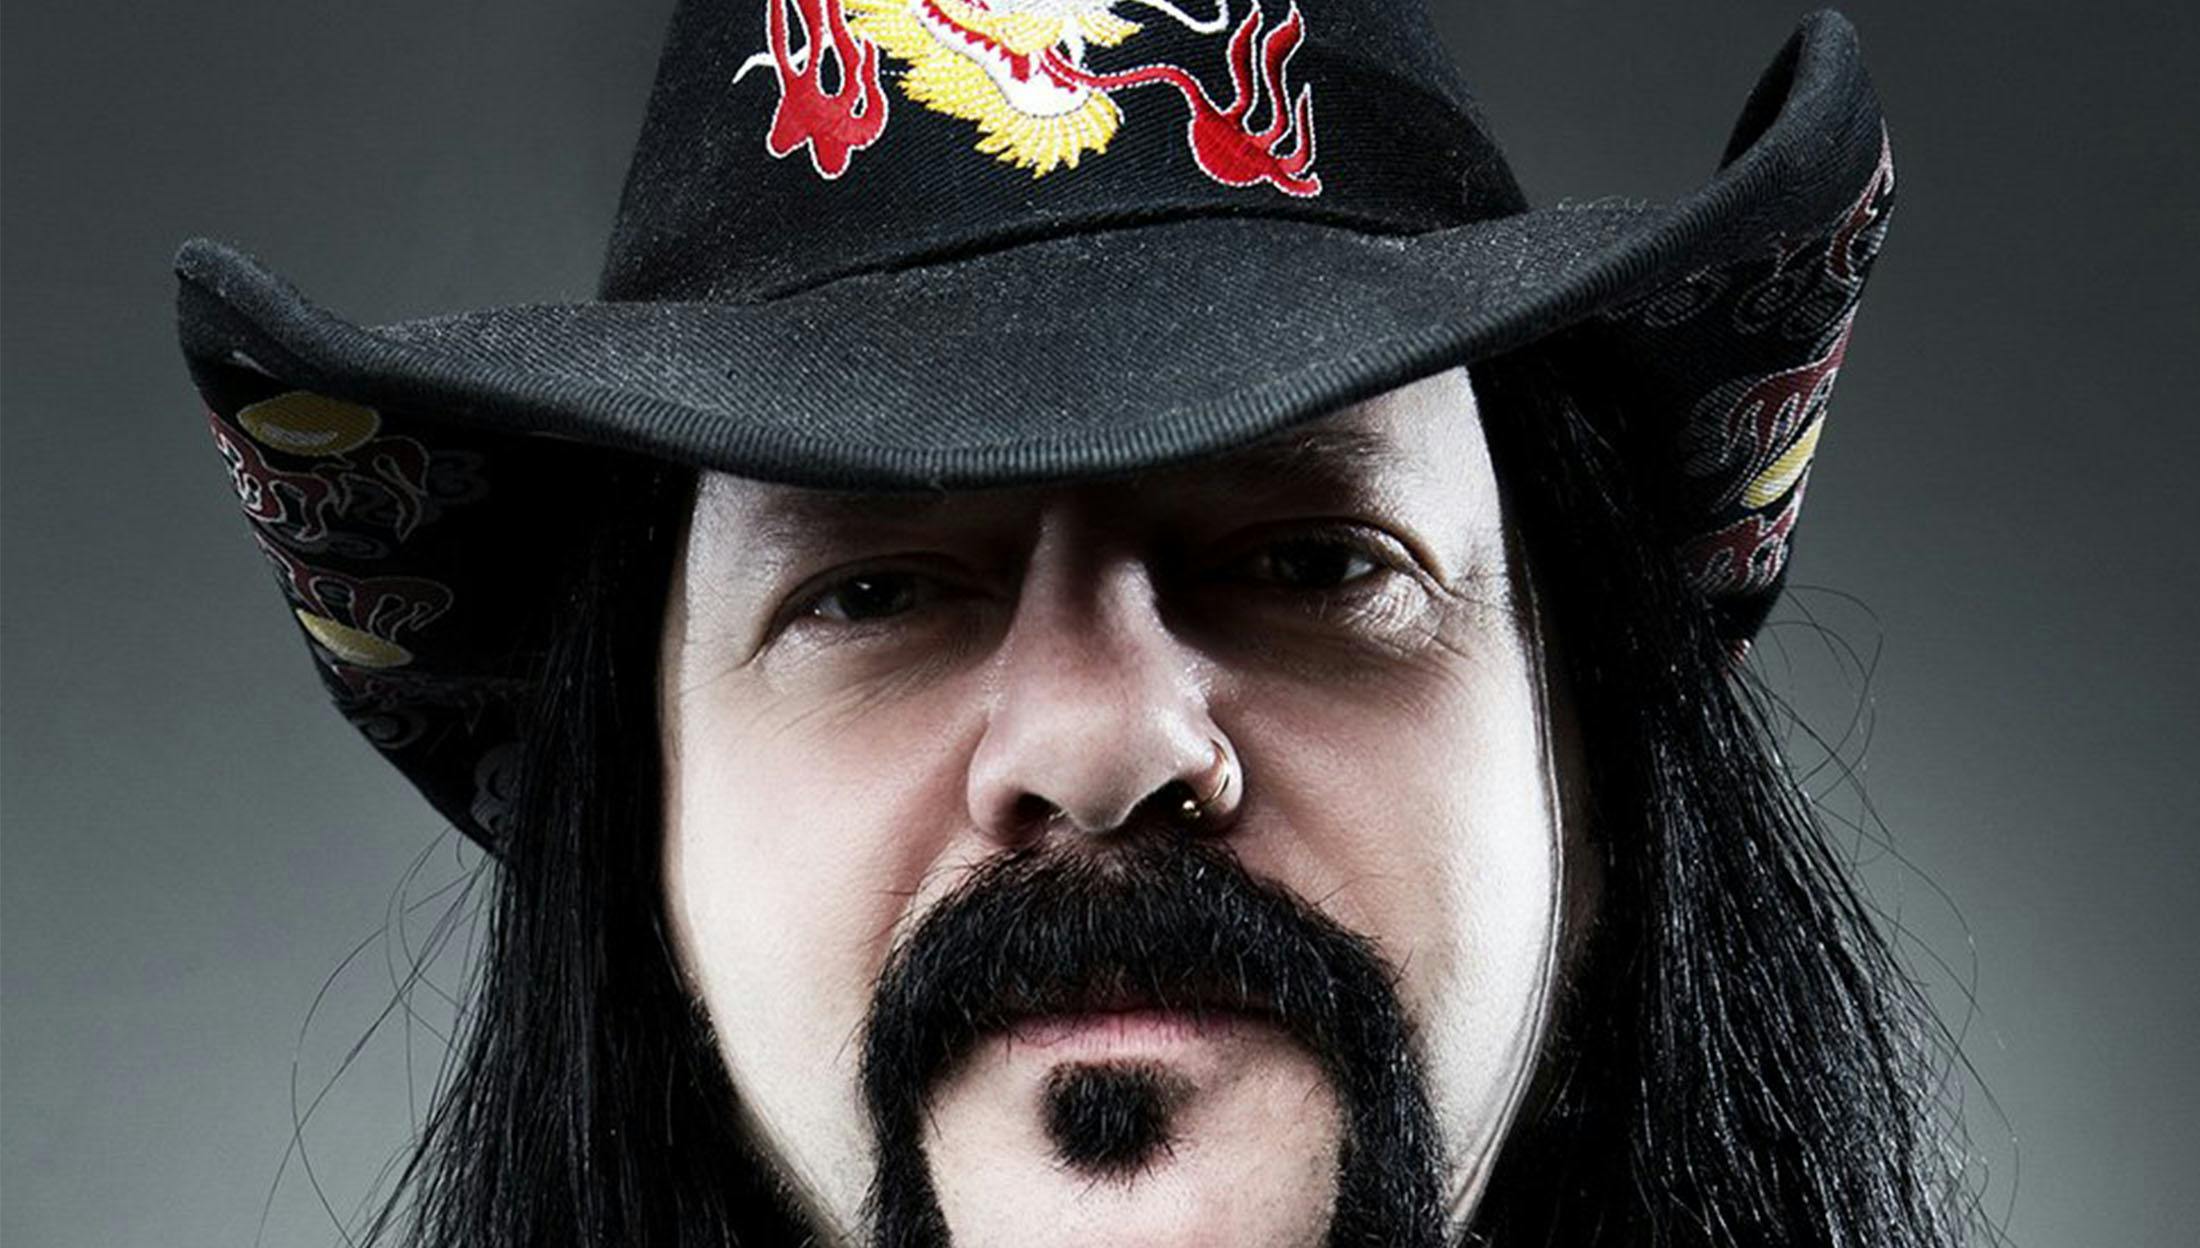 The Official Cause Of Death For Vinnie Paul Has Been Announced